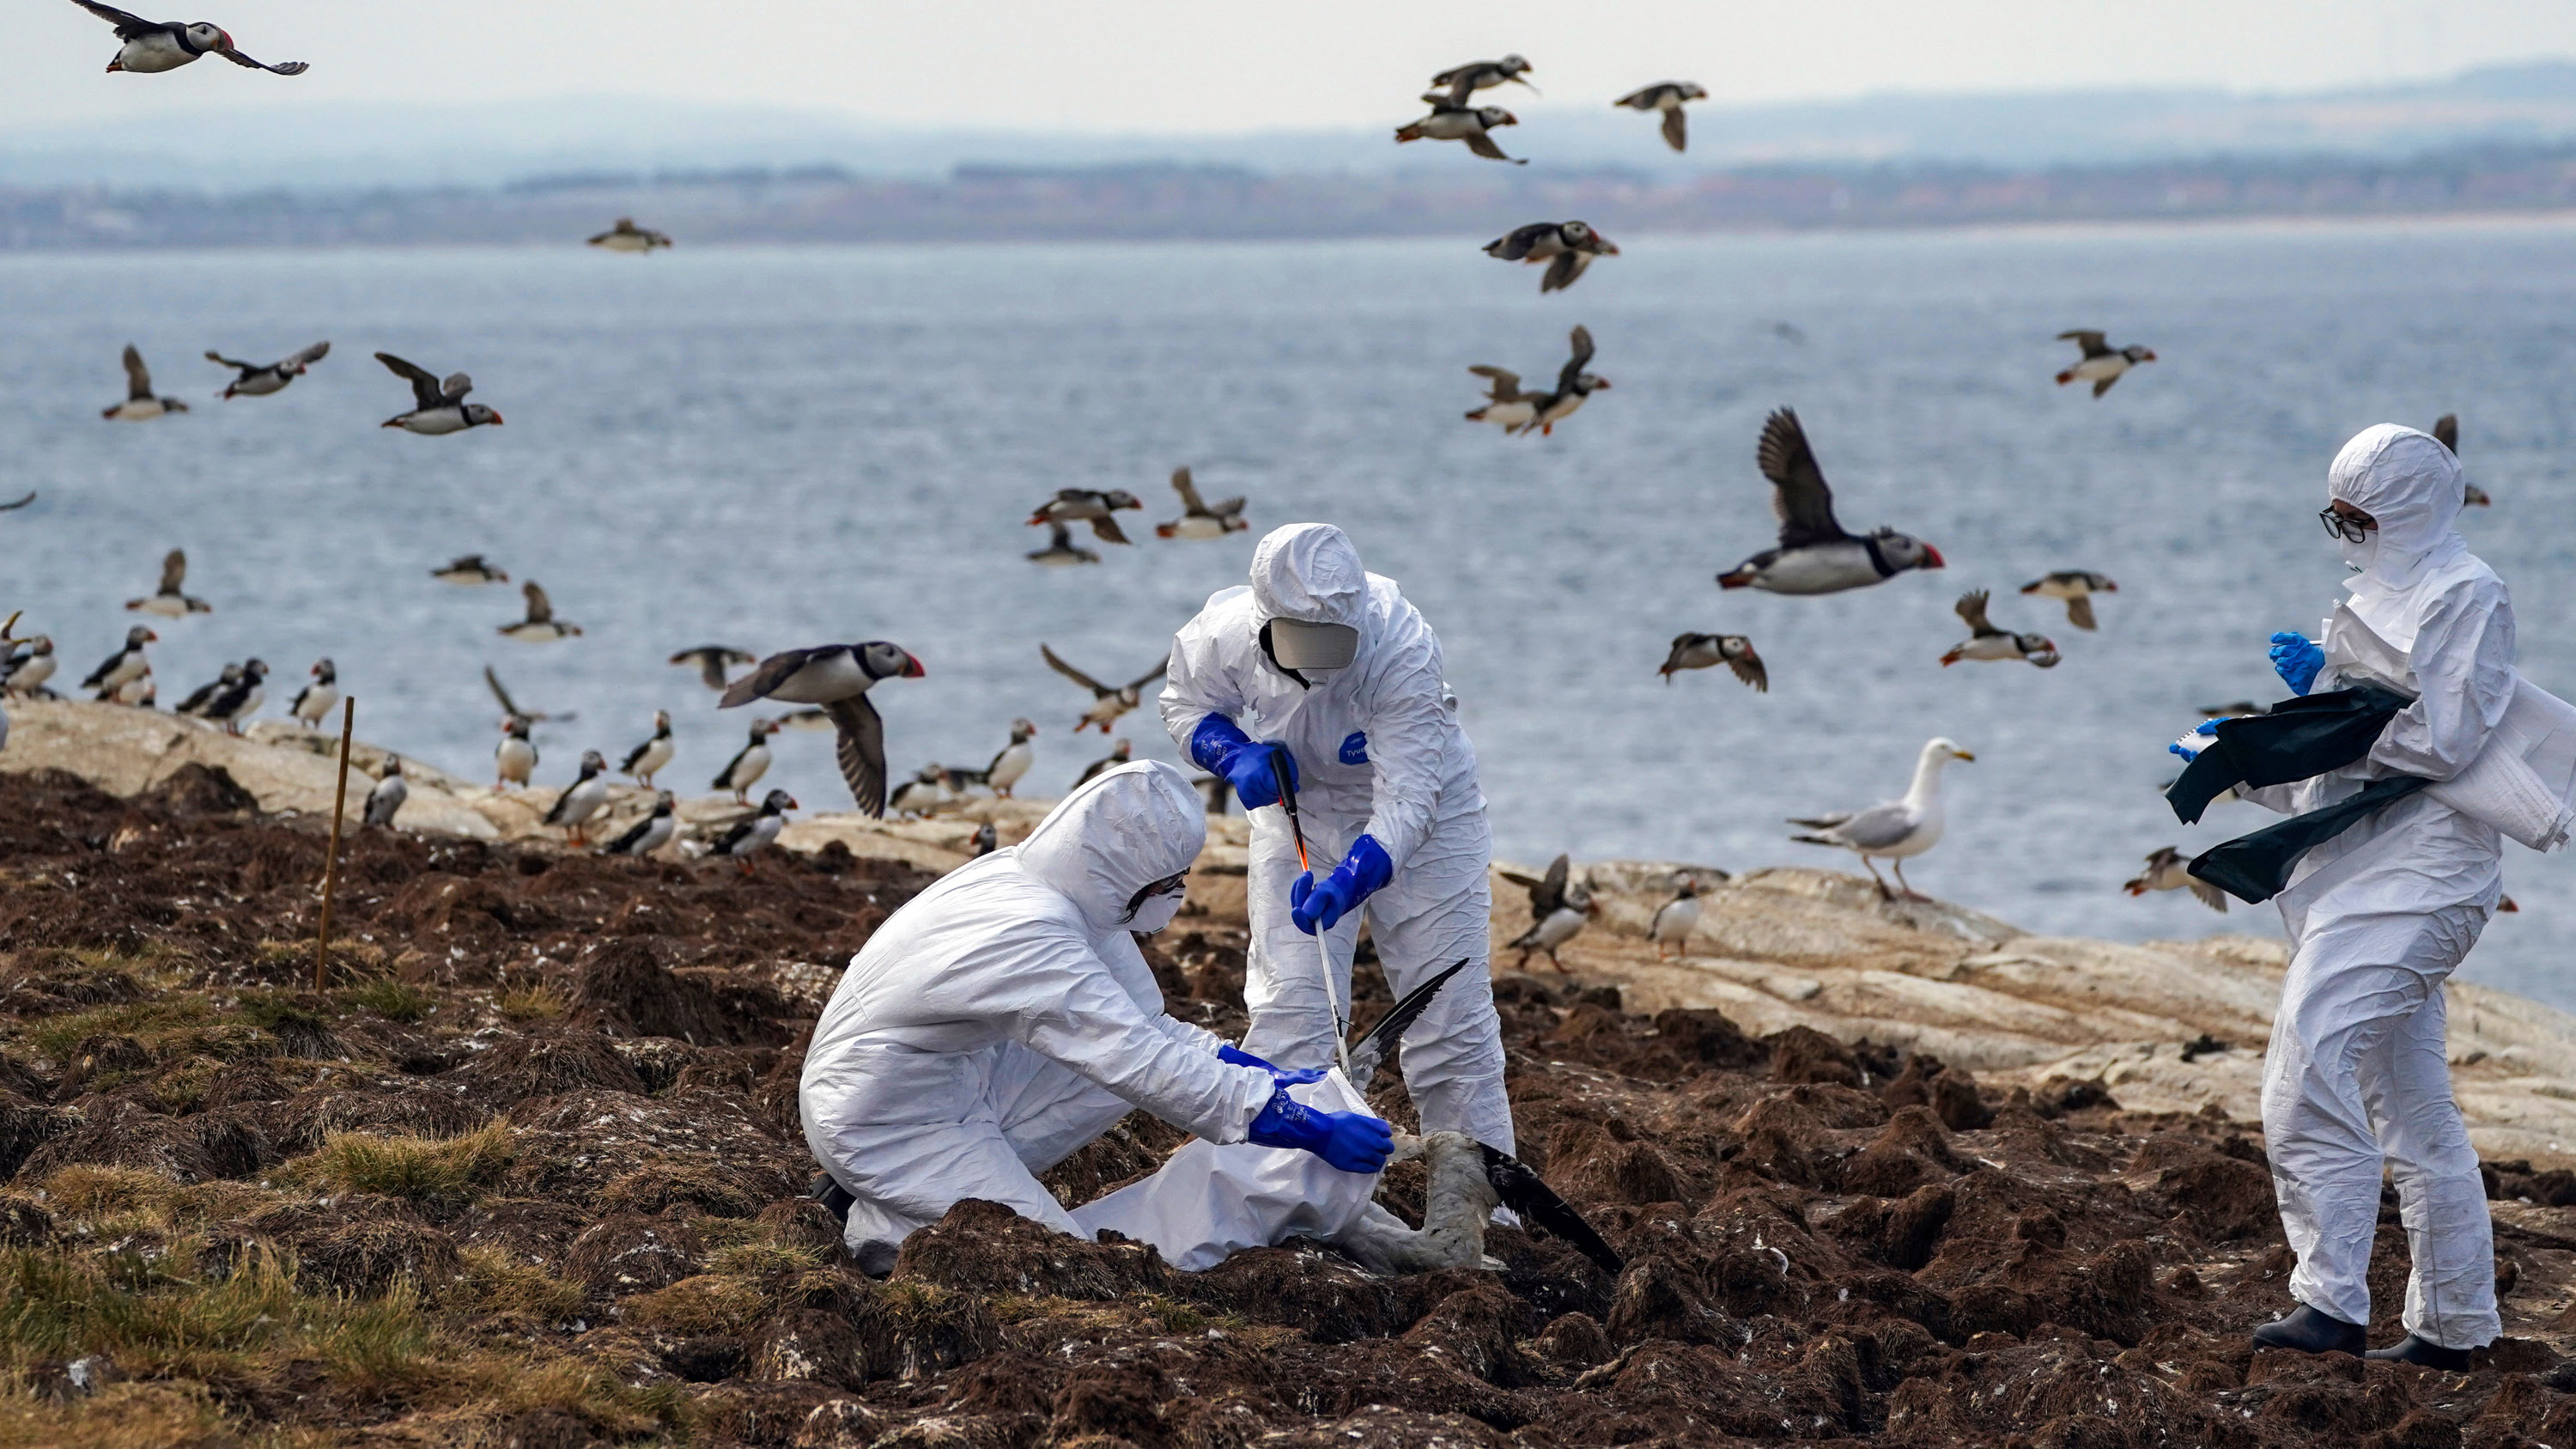 The National Trust team of rangers in protective suits clear deceased sea birds from Staple Island